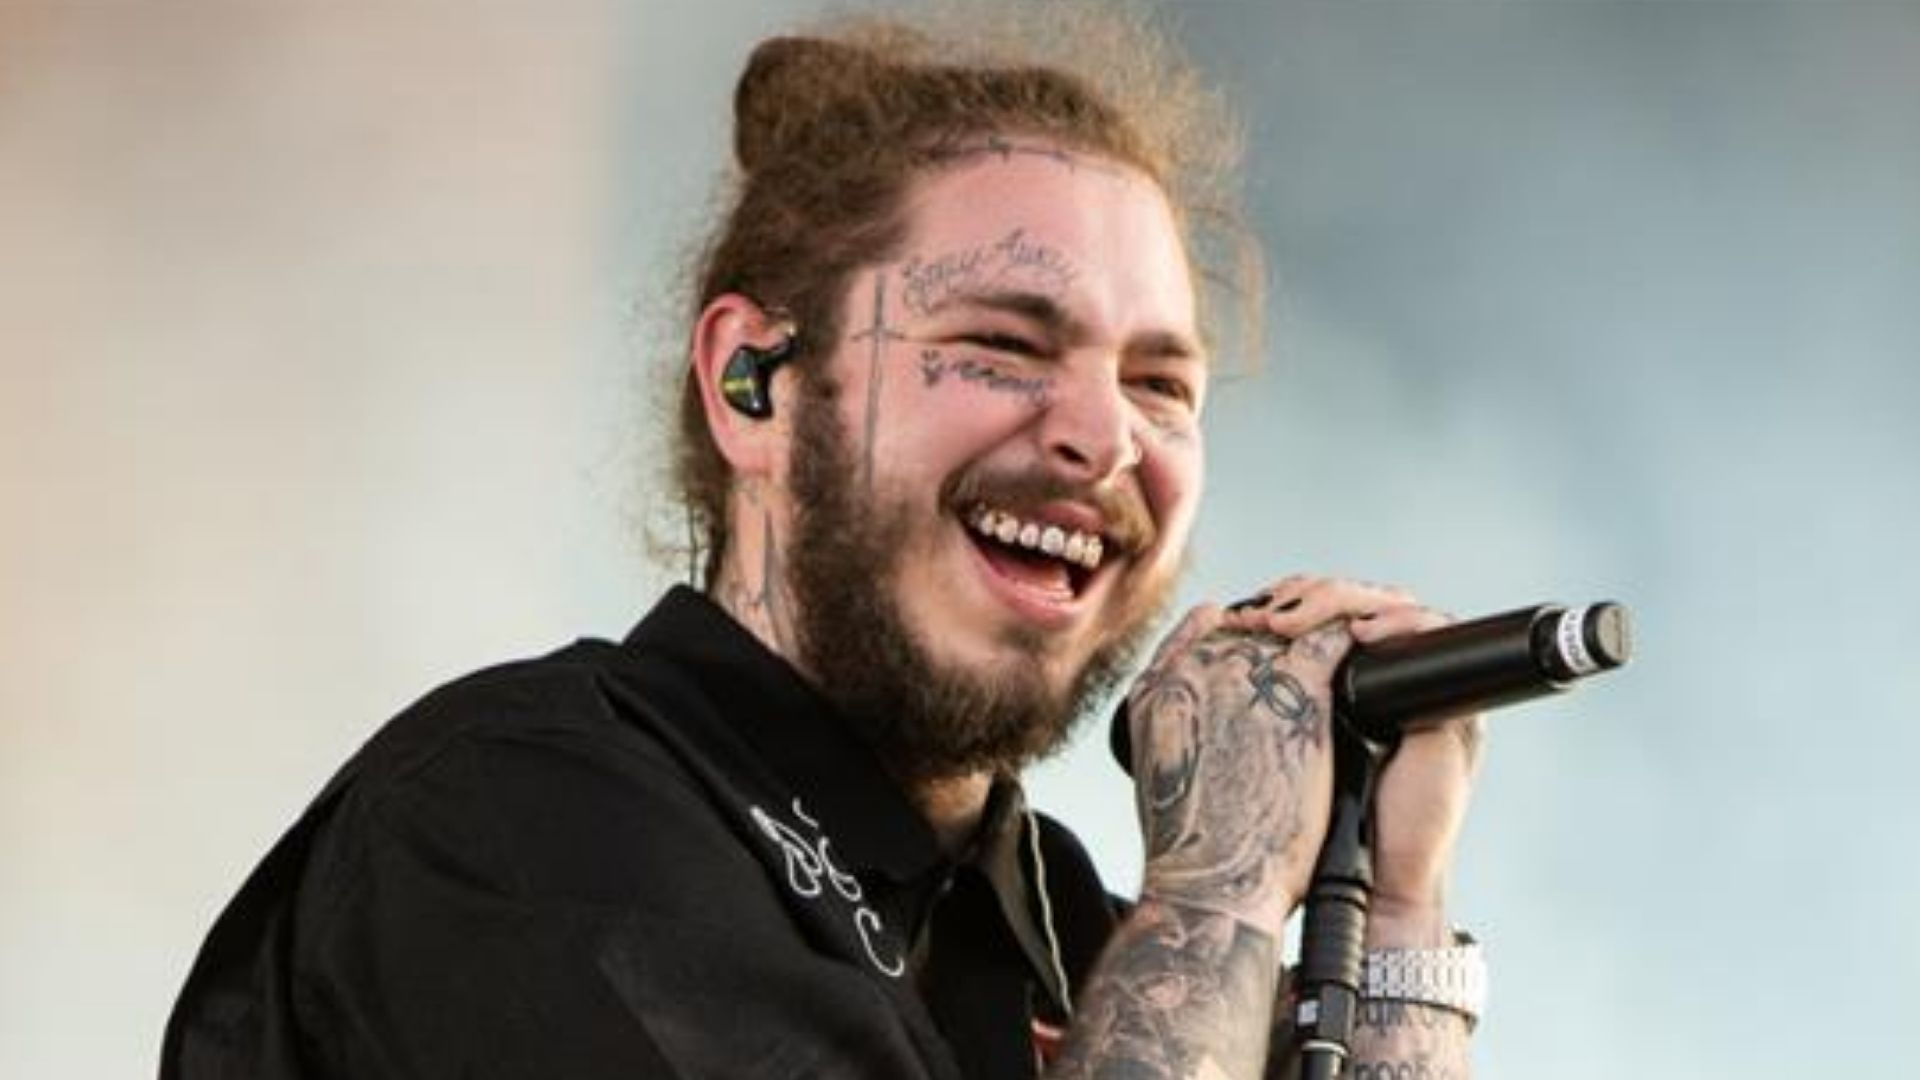 A baby is on the way for Post Malone and his girlfriend